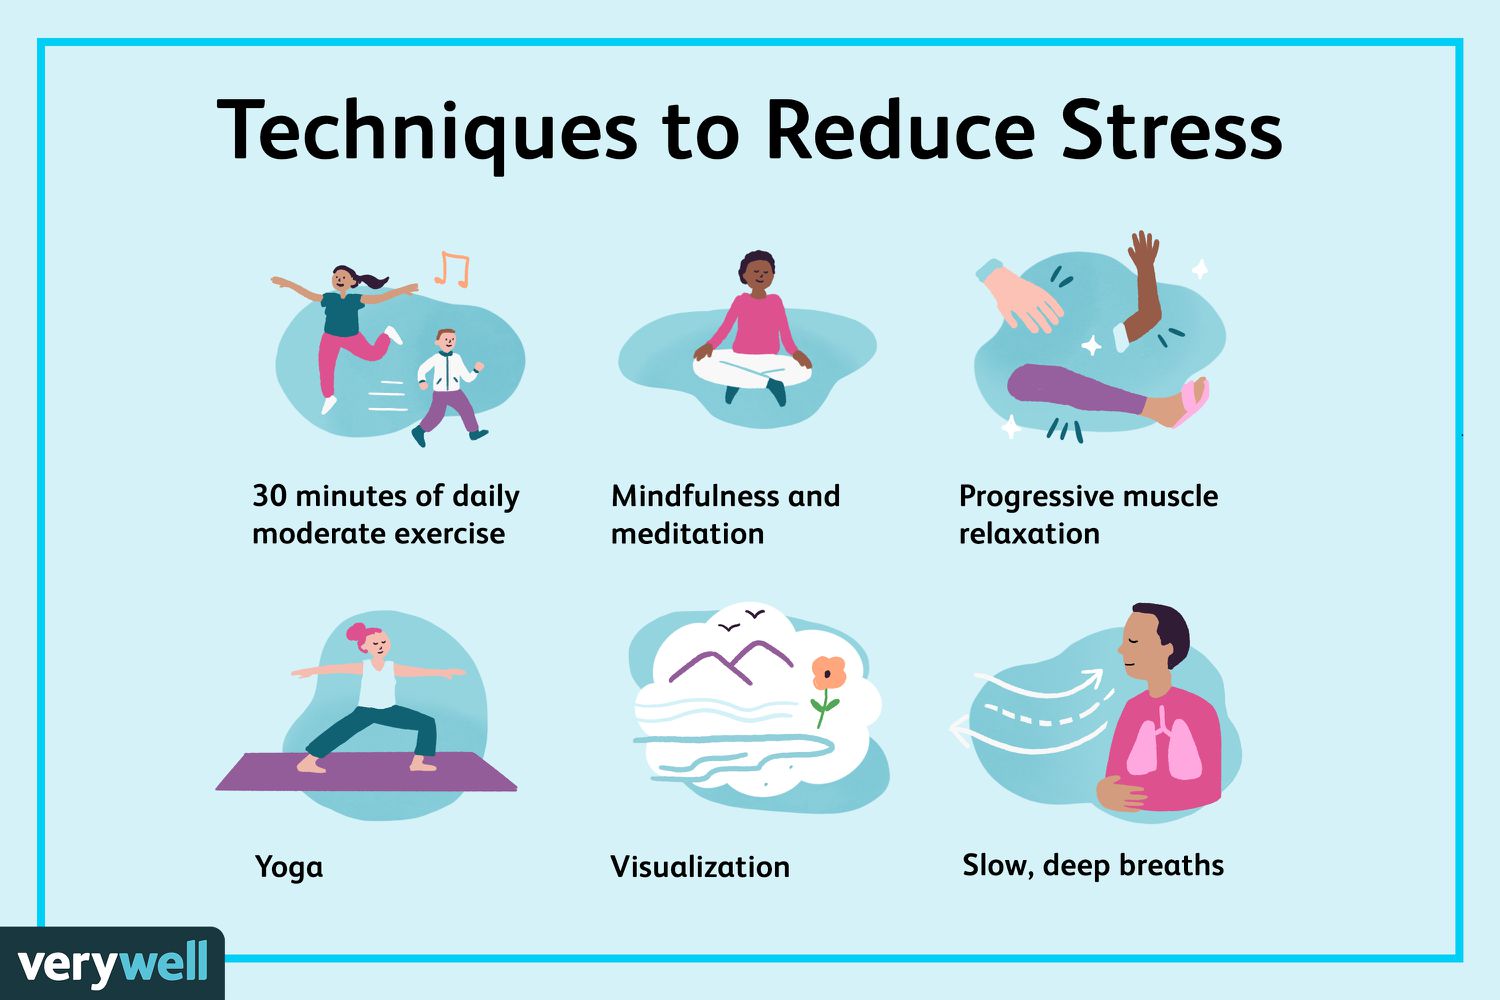 How to manage stress when dealing with life transitions for better sleep?